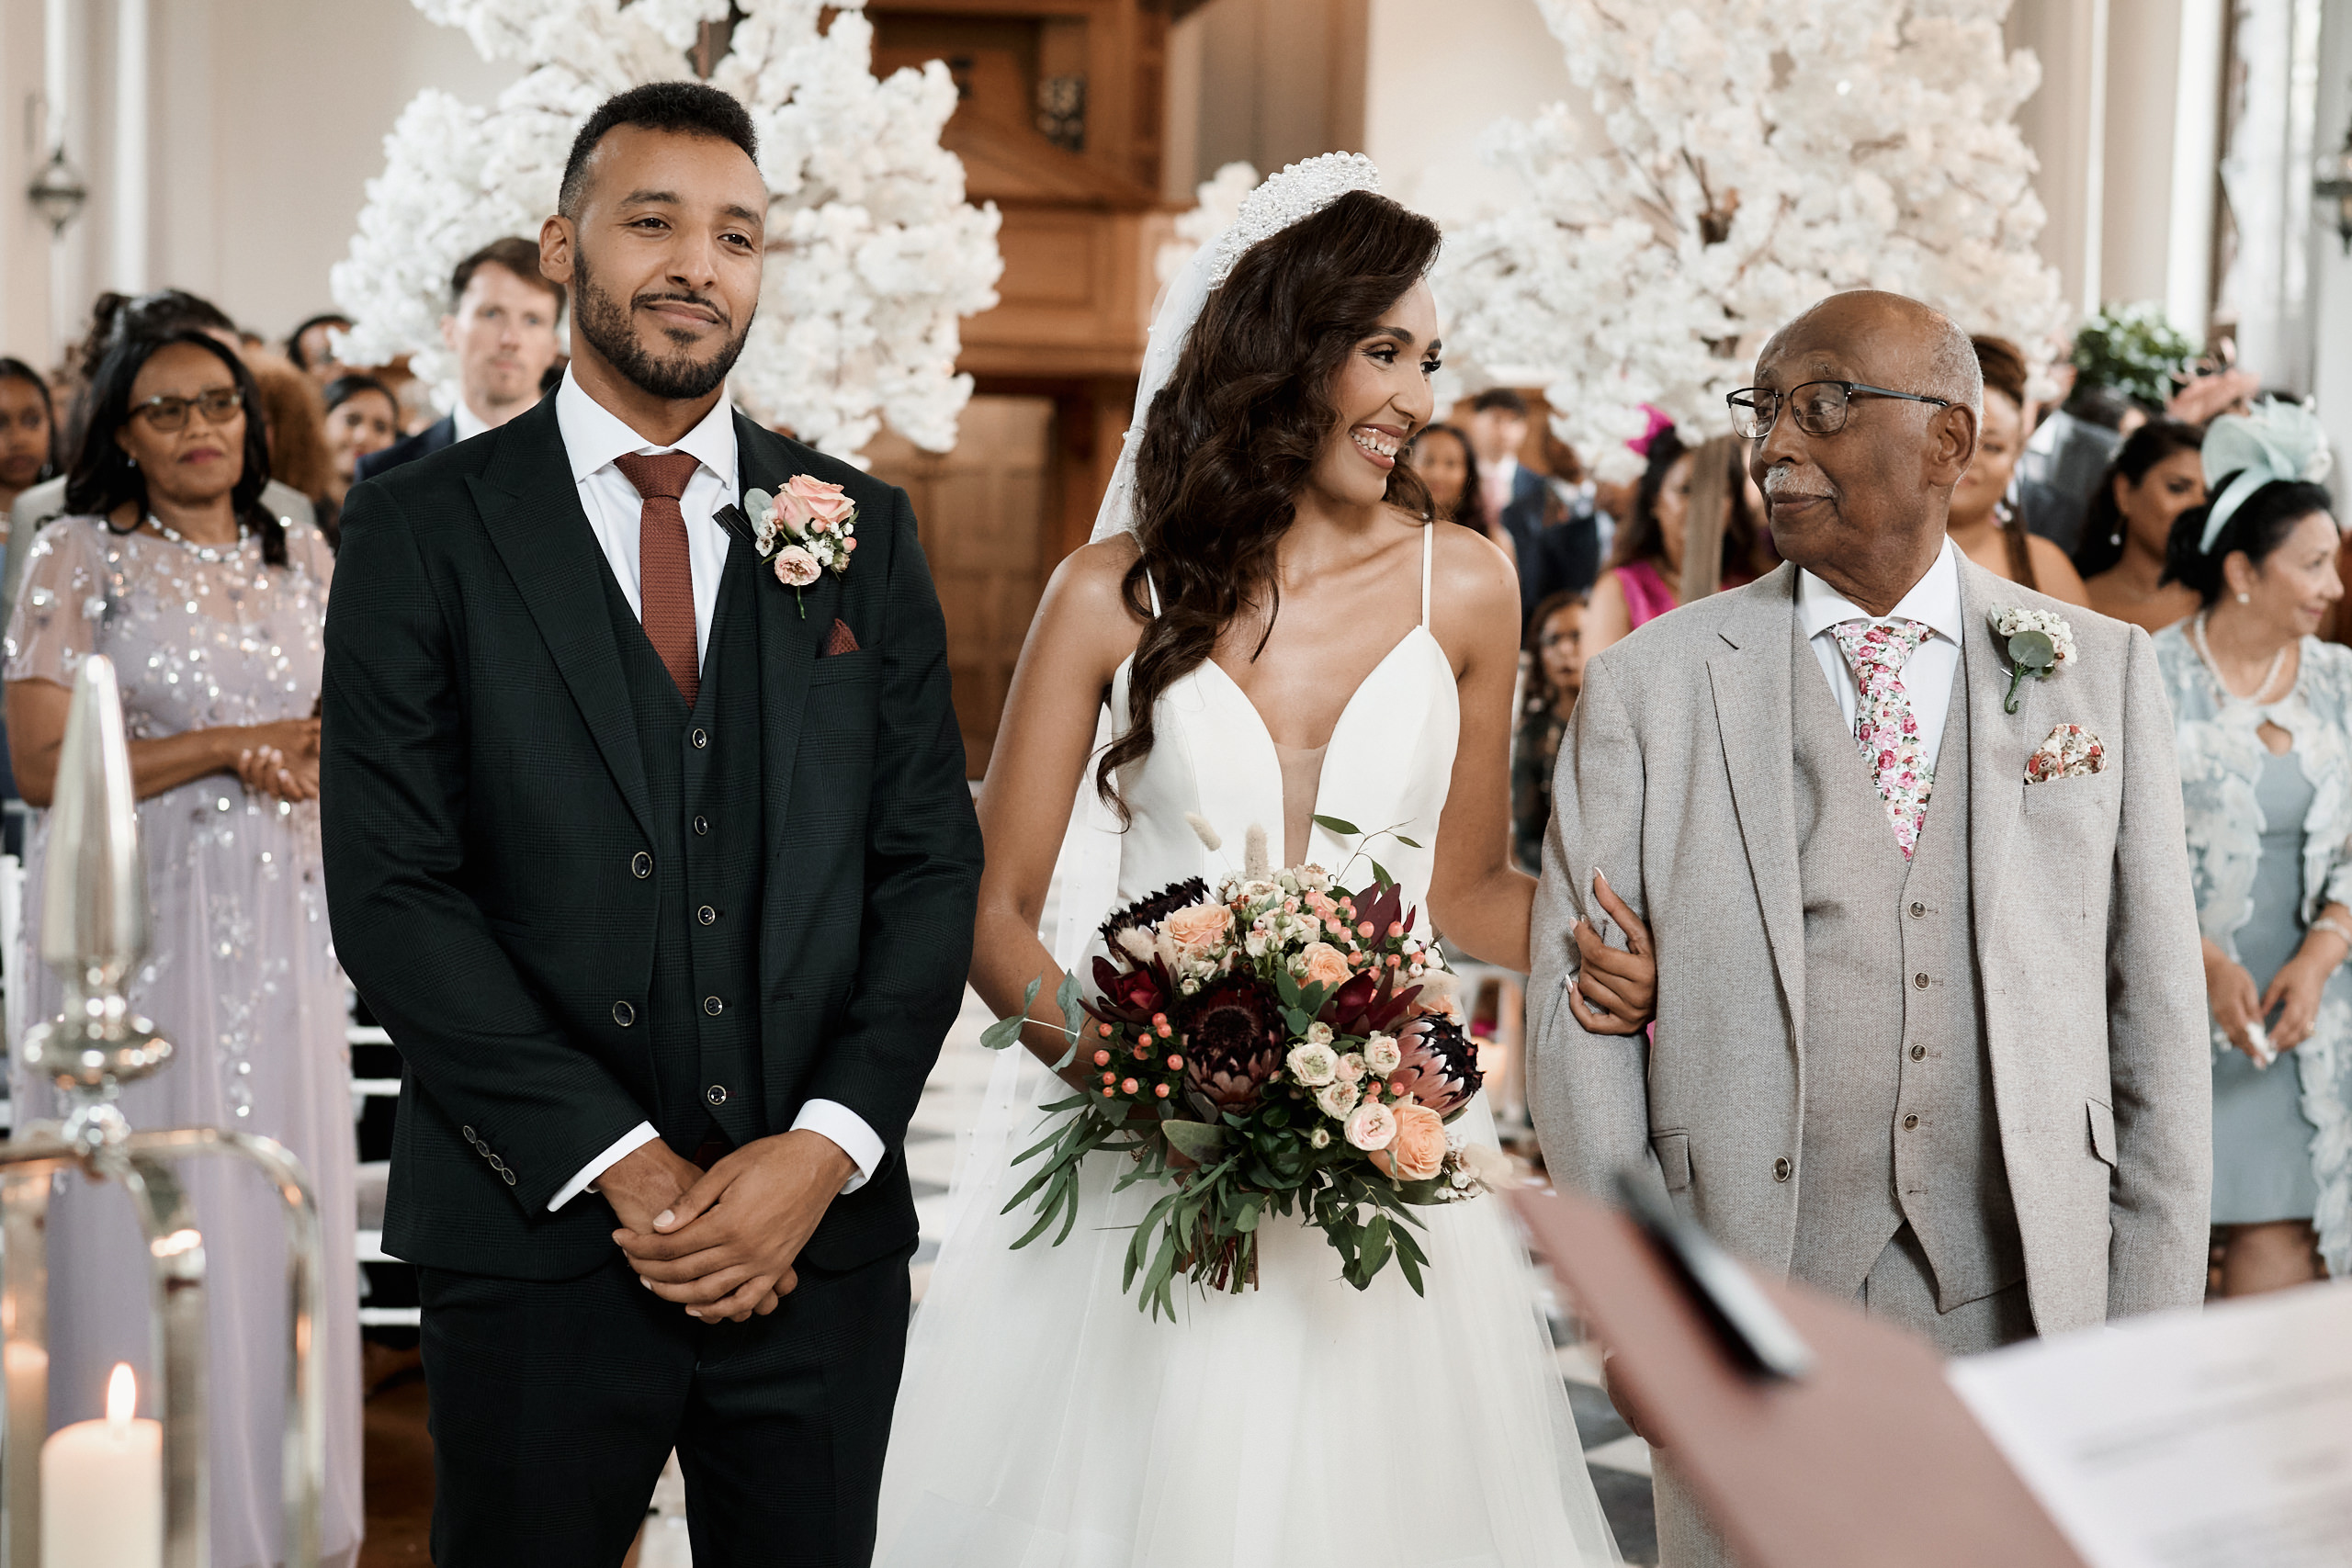 A woman is going down the aisle with her dad at her wedding.